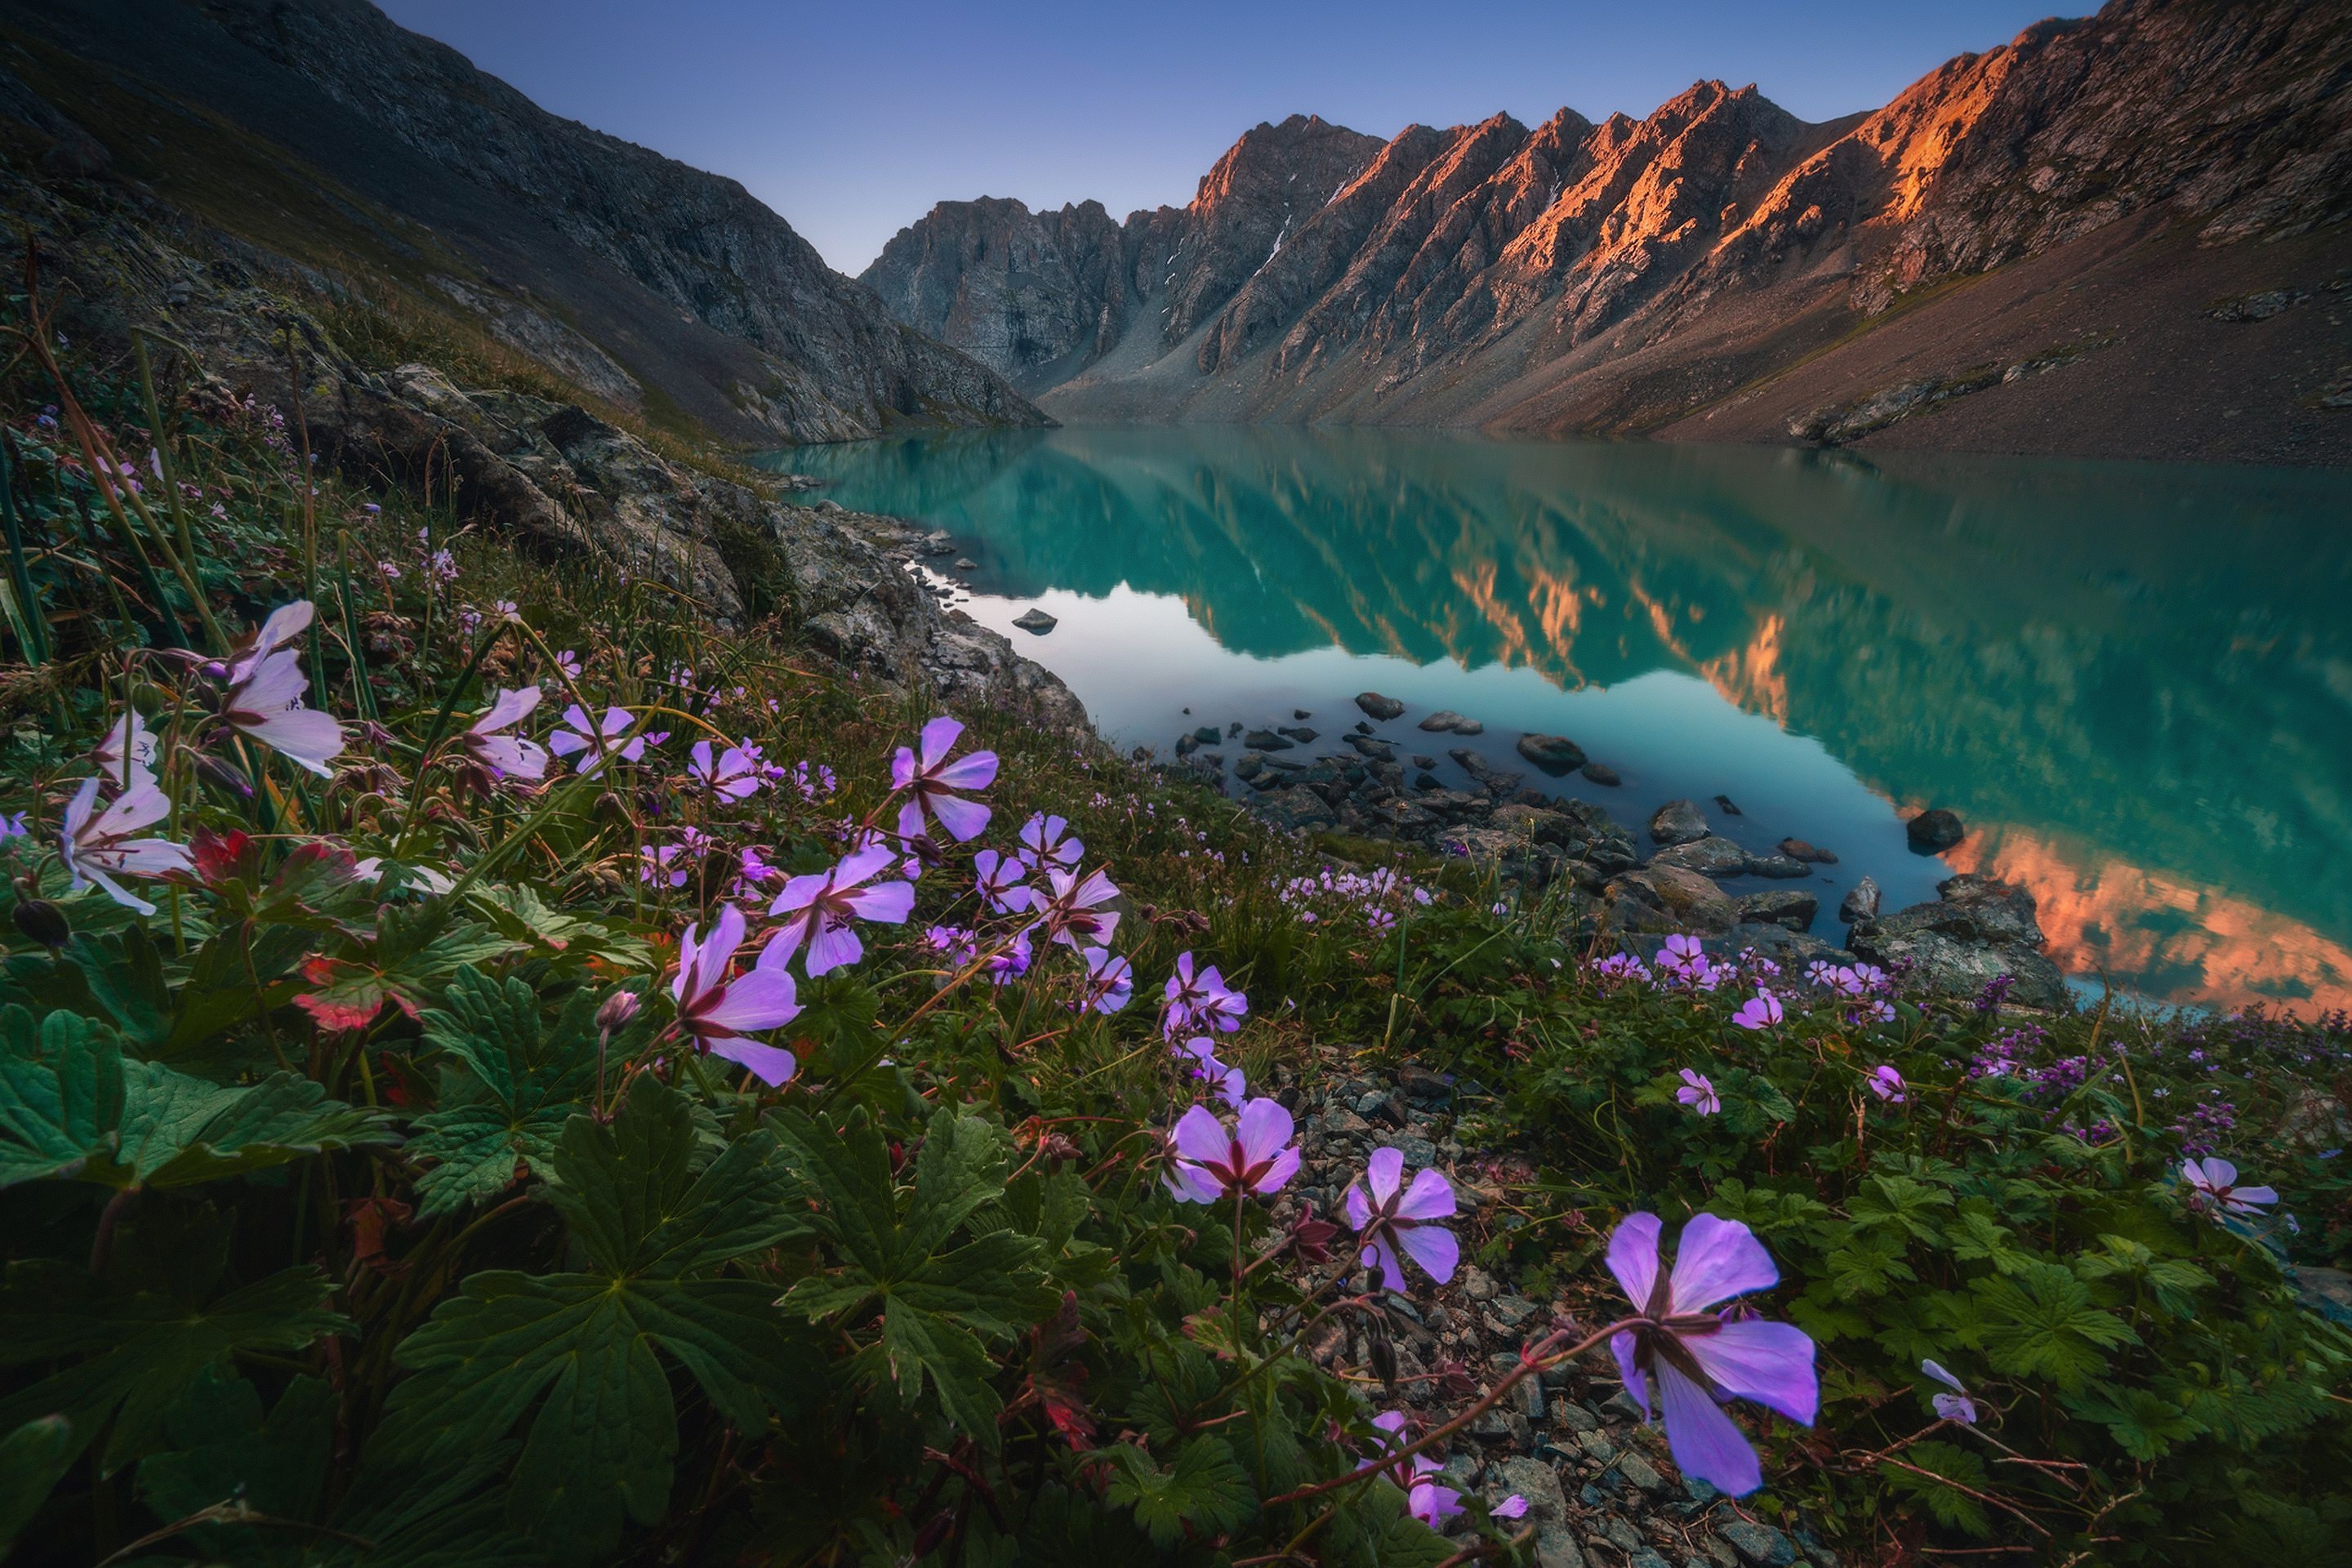 General 2880x1920 lake mountains flowers nature plants reflection water Kyrgyzstan